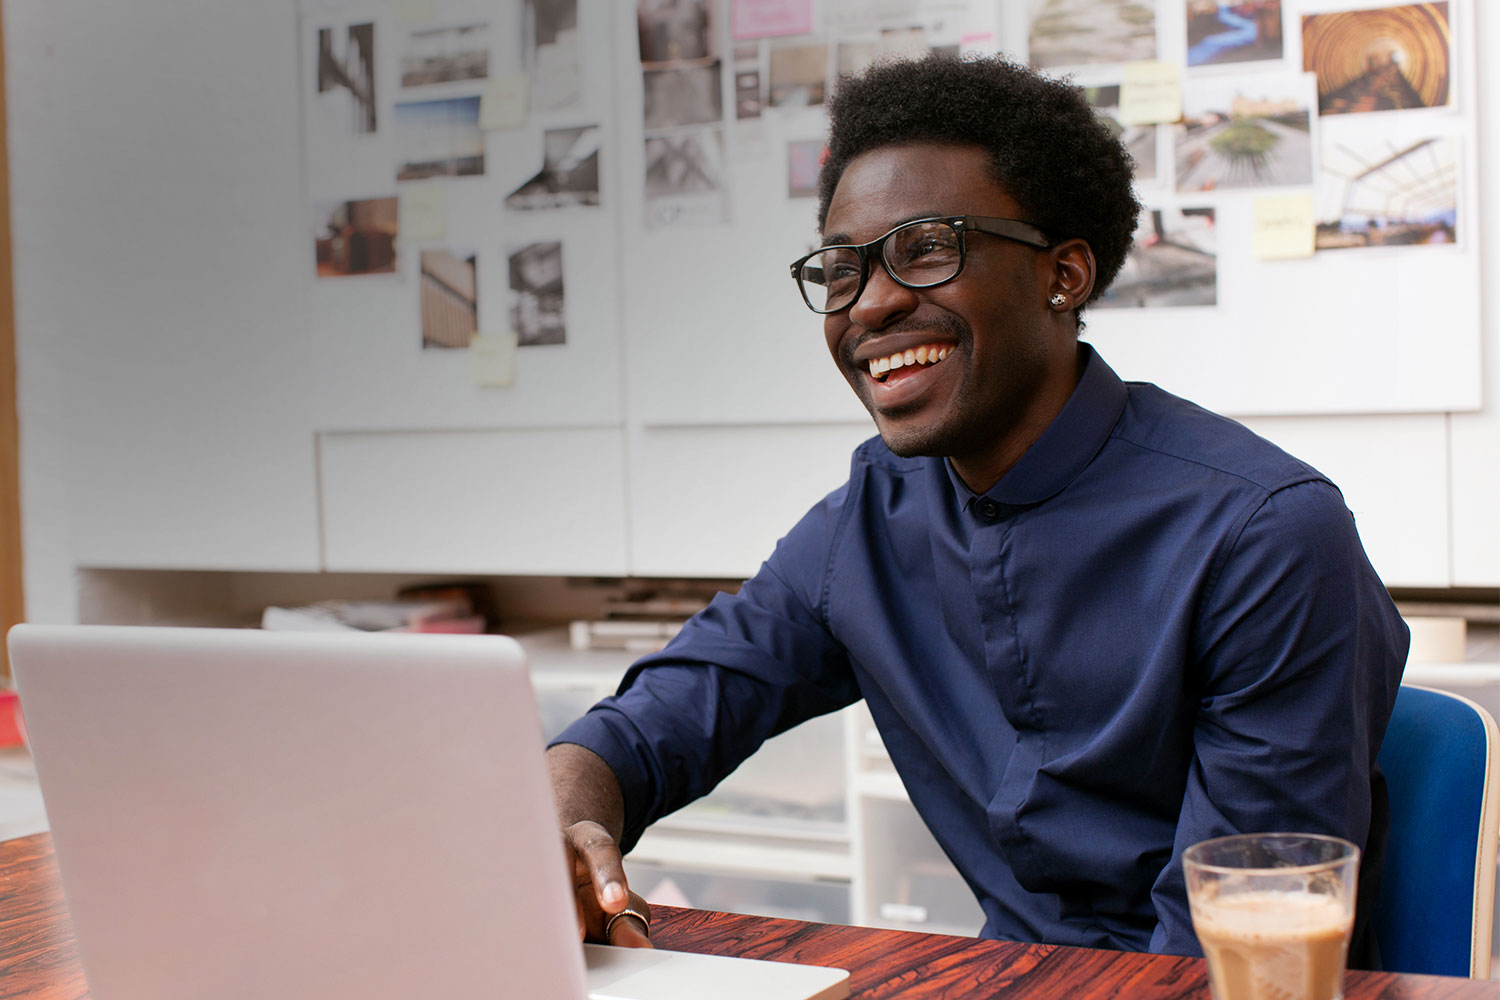 Man smiling while sitting at a desk in front of an open laptop